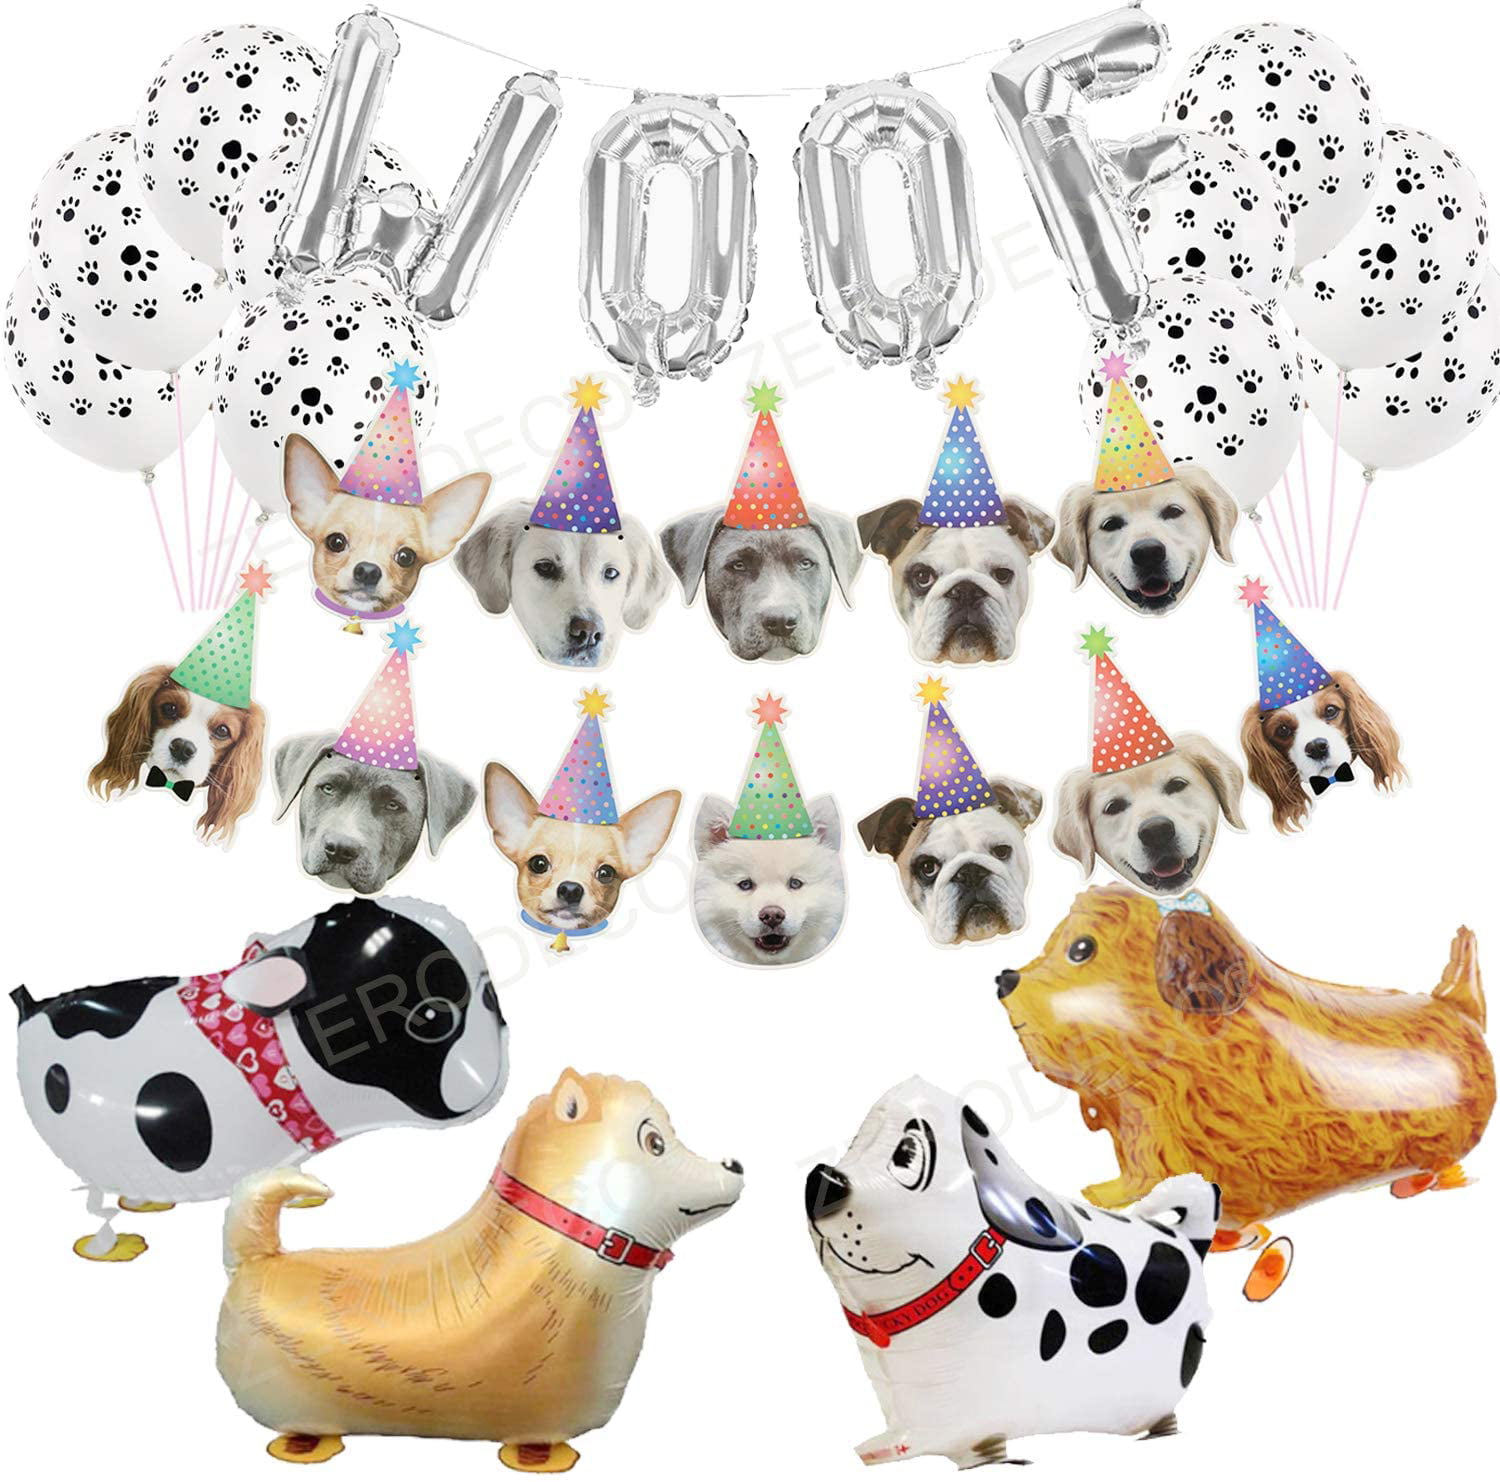 ZERODECO Dog Party Decoration Walking Animal Balloons WOOF Foil Balloon Banner Dog Faces Garland Paw Balloons for Pet Dog Doggie Puppy Animal Theme Party Supplies Decorations